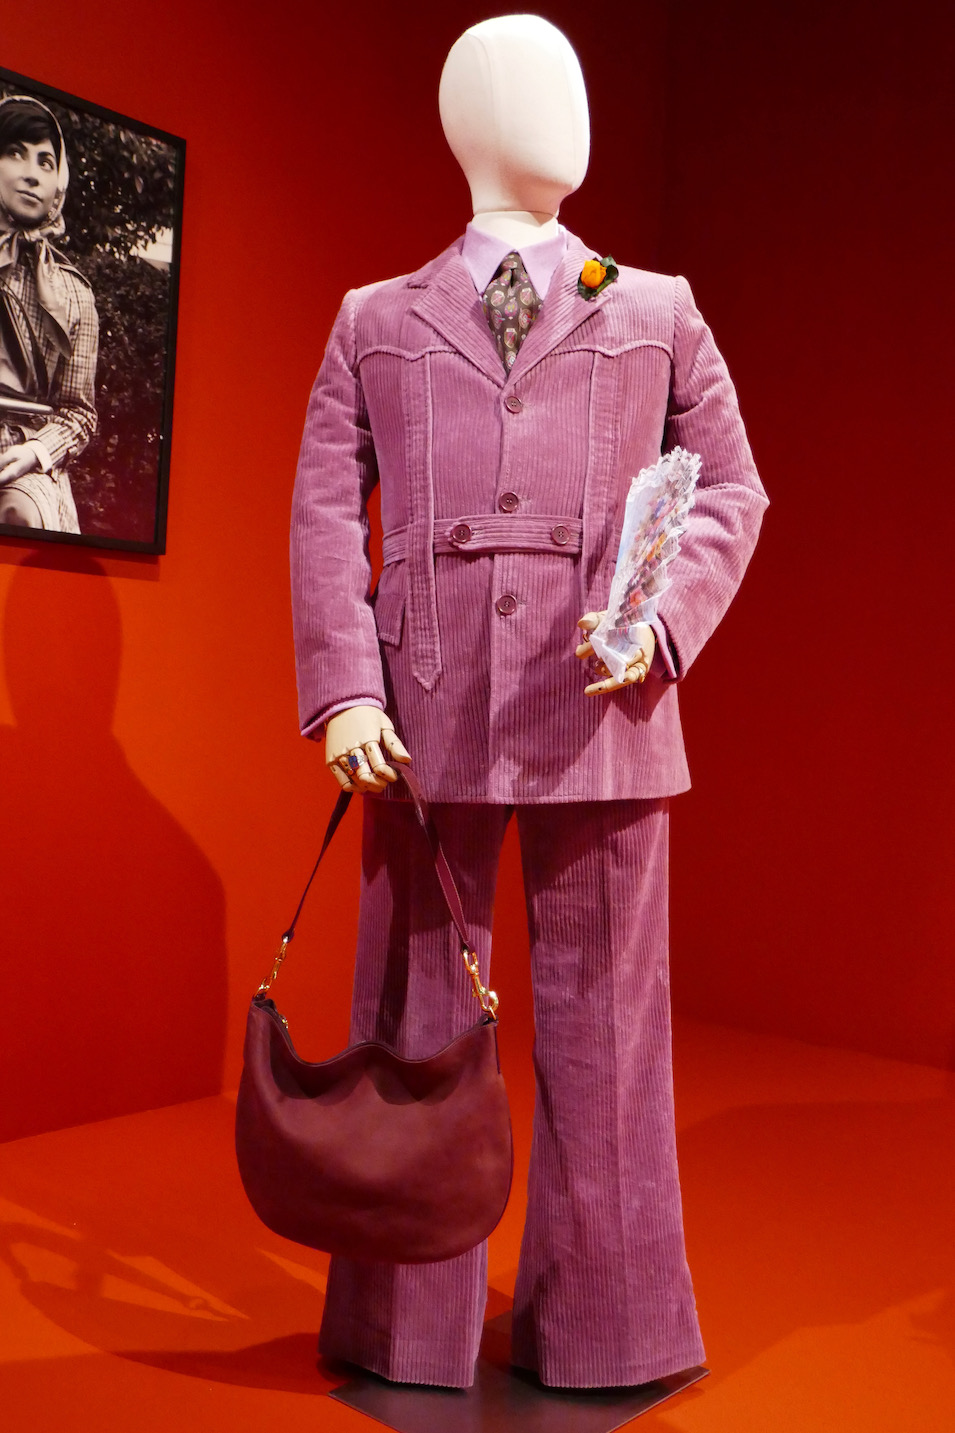 Hollywood Movie Costumes and Props: Jared Leto's Paolo Gucci costume from  House of Gucci on display...